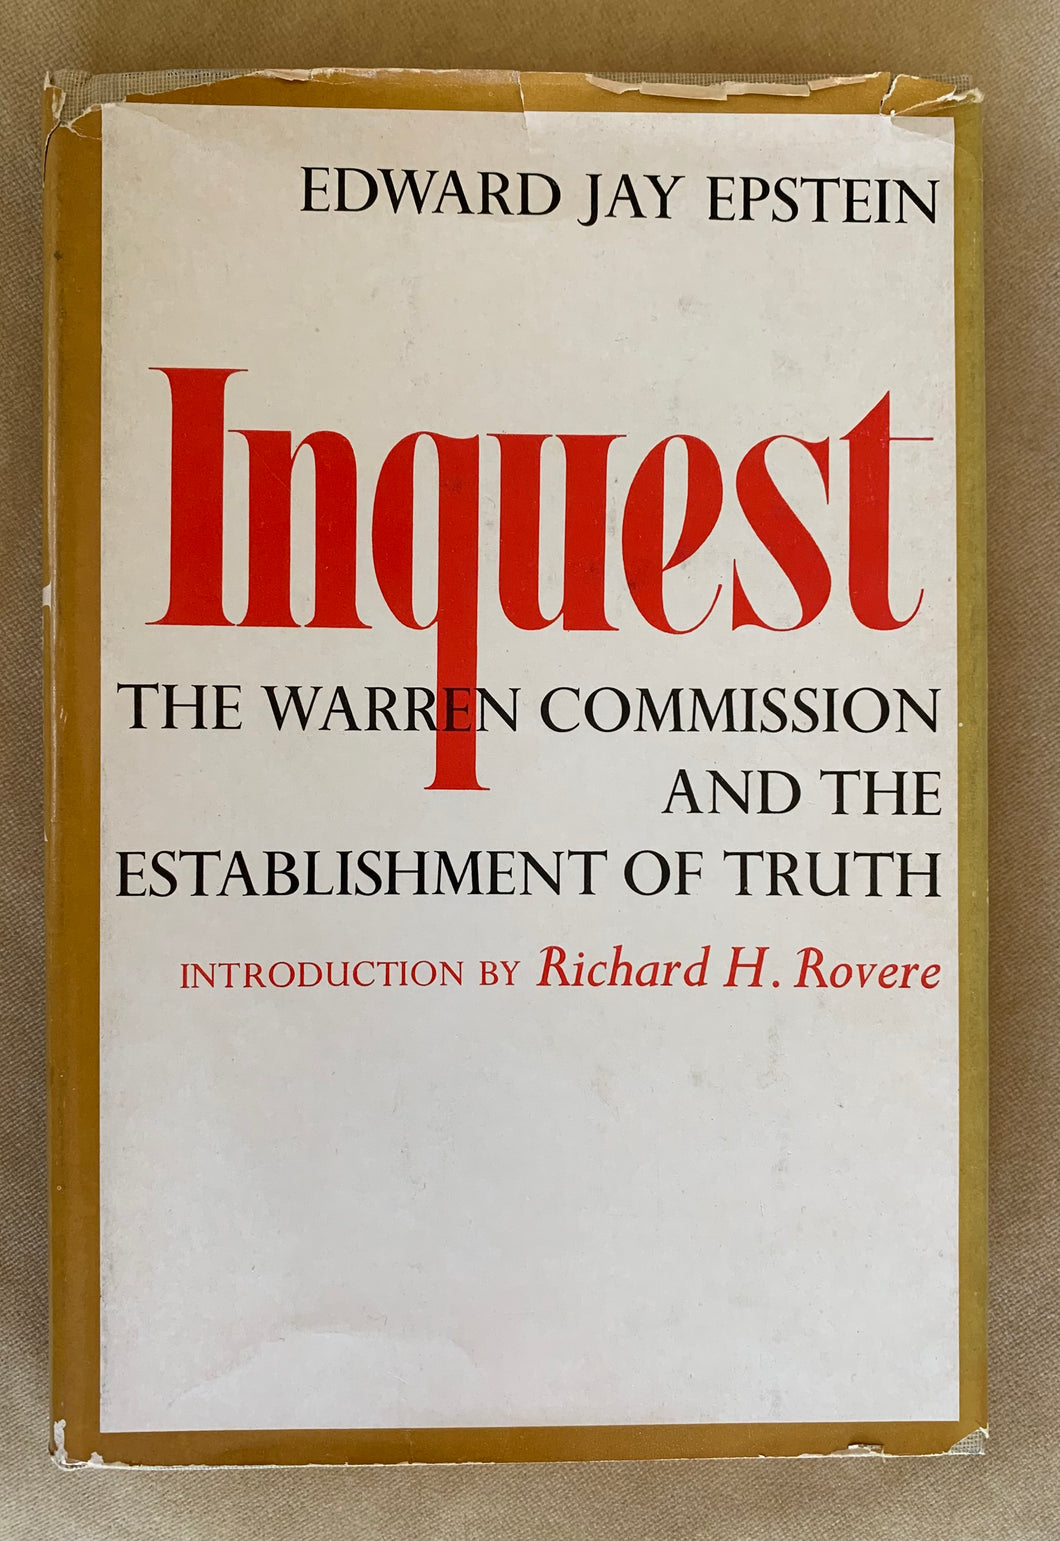 Inquest: The Warren Commission and the Establishment of Truth